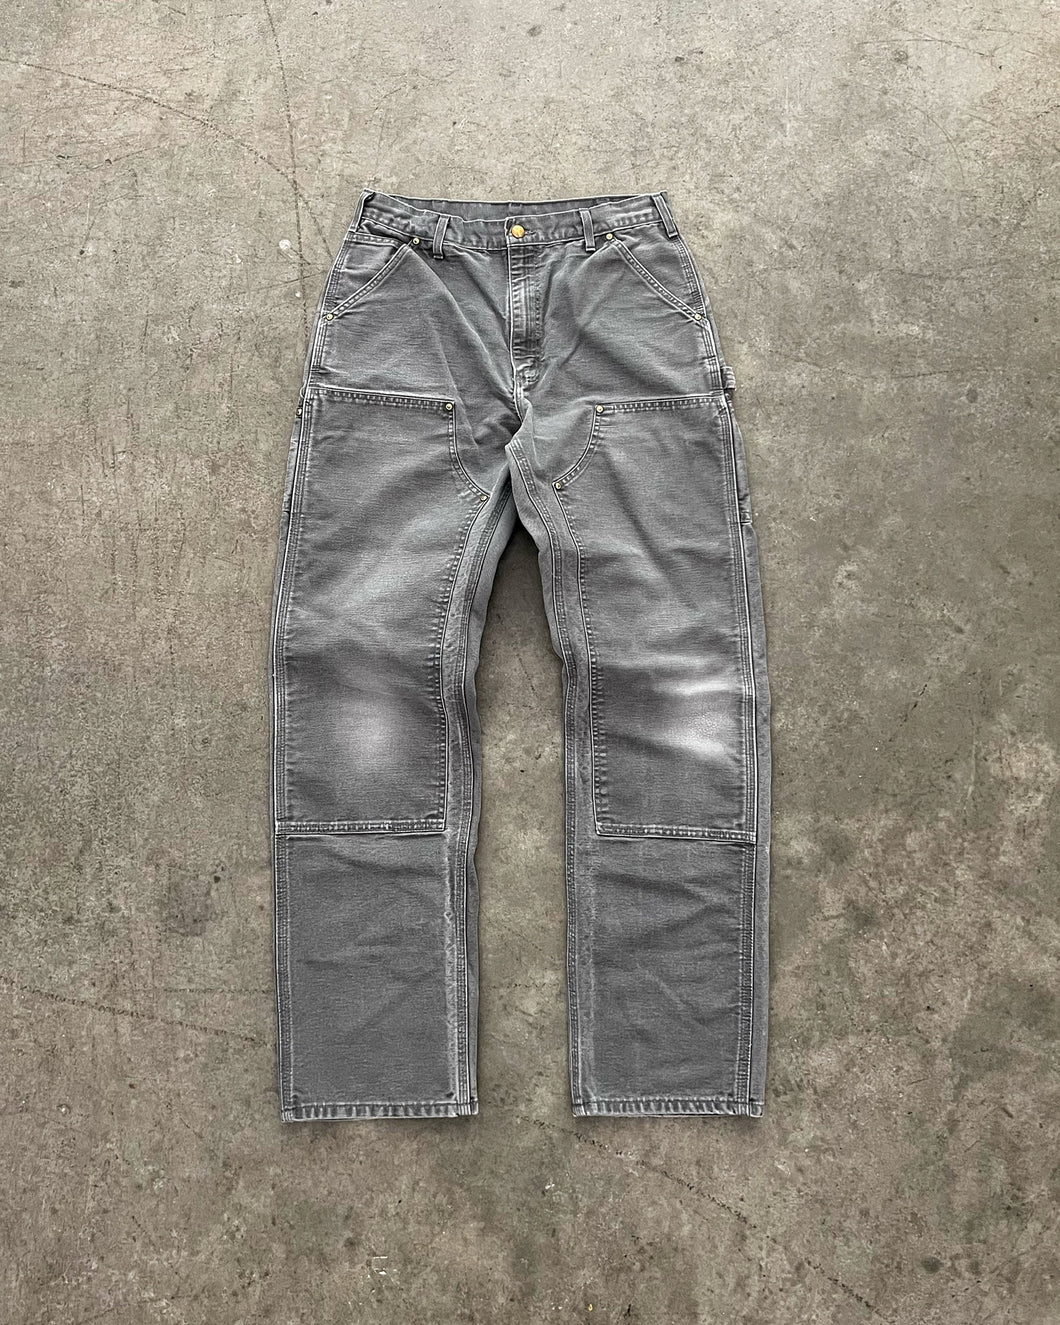 FADED CEMENT GREY CARHARTT DOUBLE KNEE PANTS - 1990S